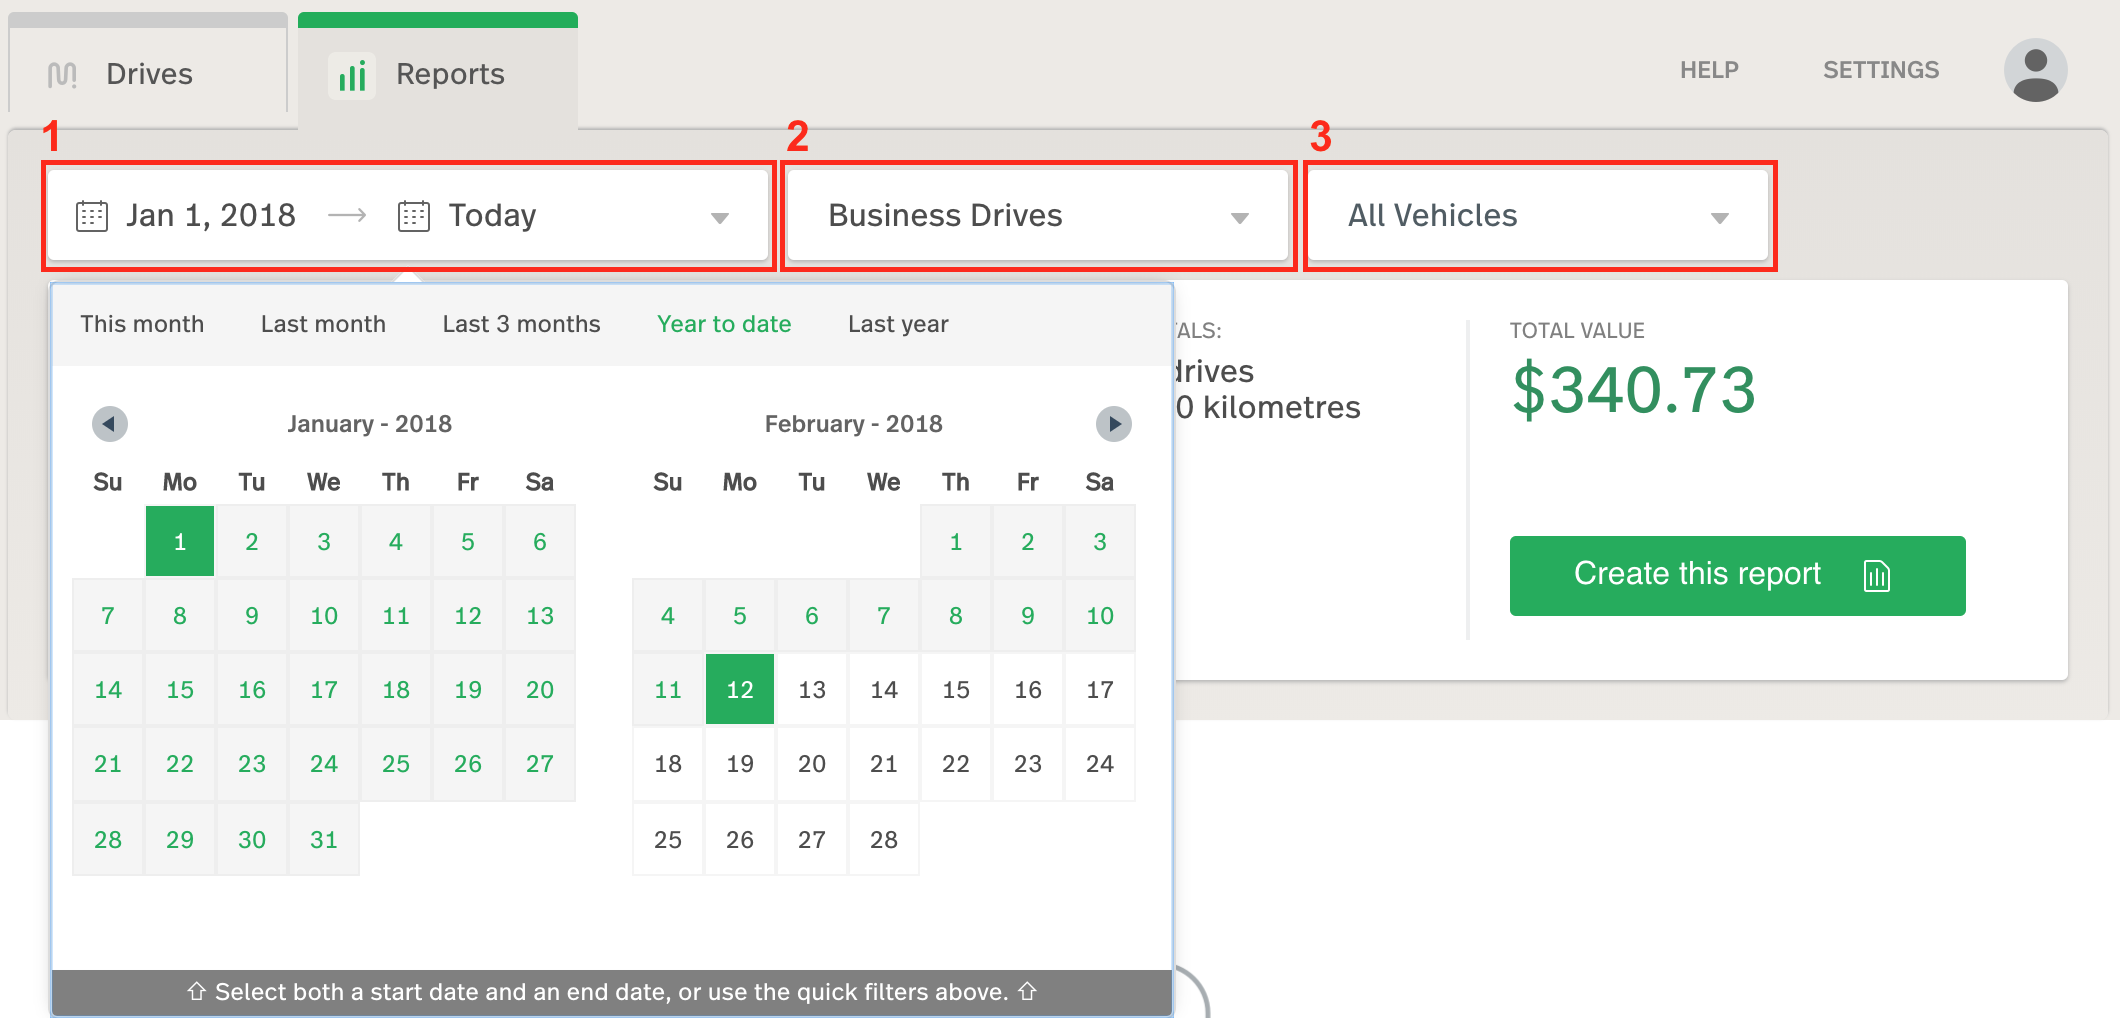 This image shows the Reports View. The date selector, drive selector, and vehicle selector are outlined in order.